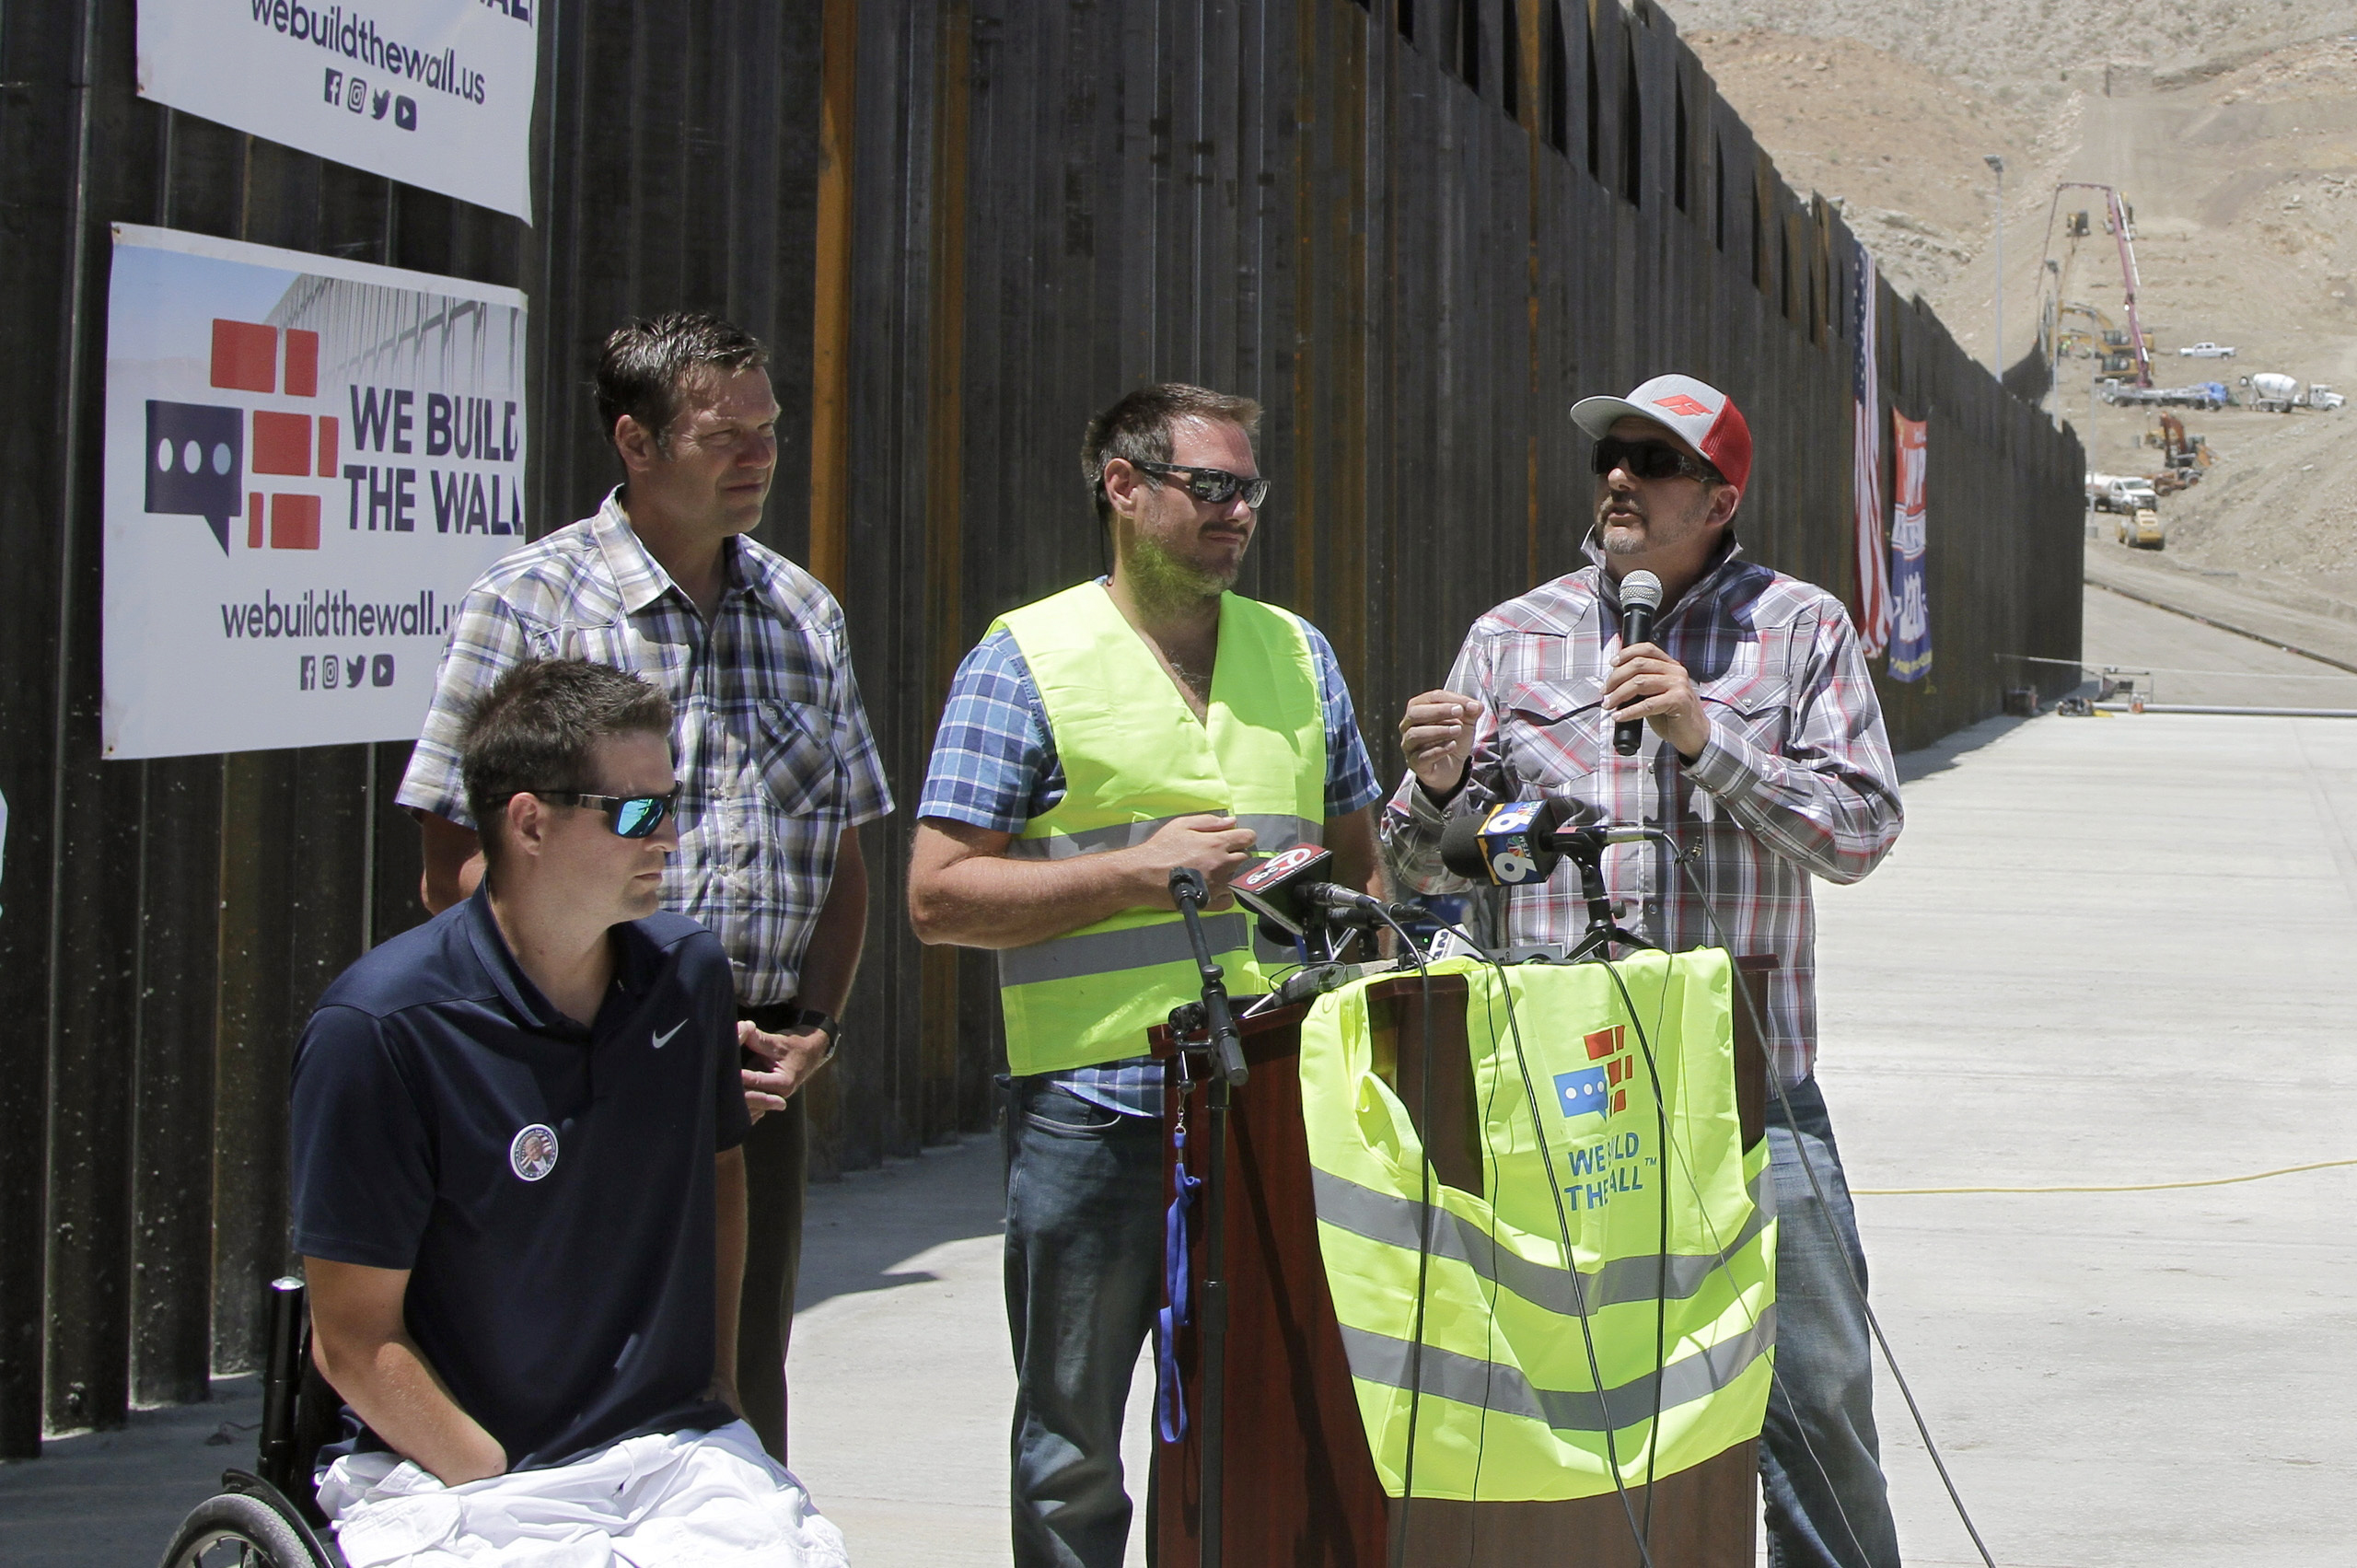 PHOTO: Leaders of We Build the Wall Inc. discuss plans for future barrier construction along the U.S.-Mexico border, May 30, 2019, in Sunland Park, N.M.